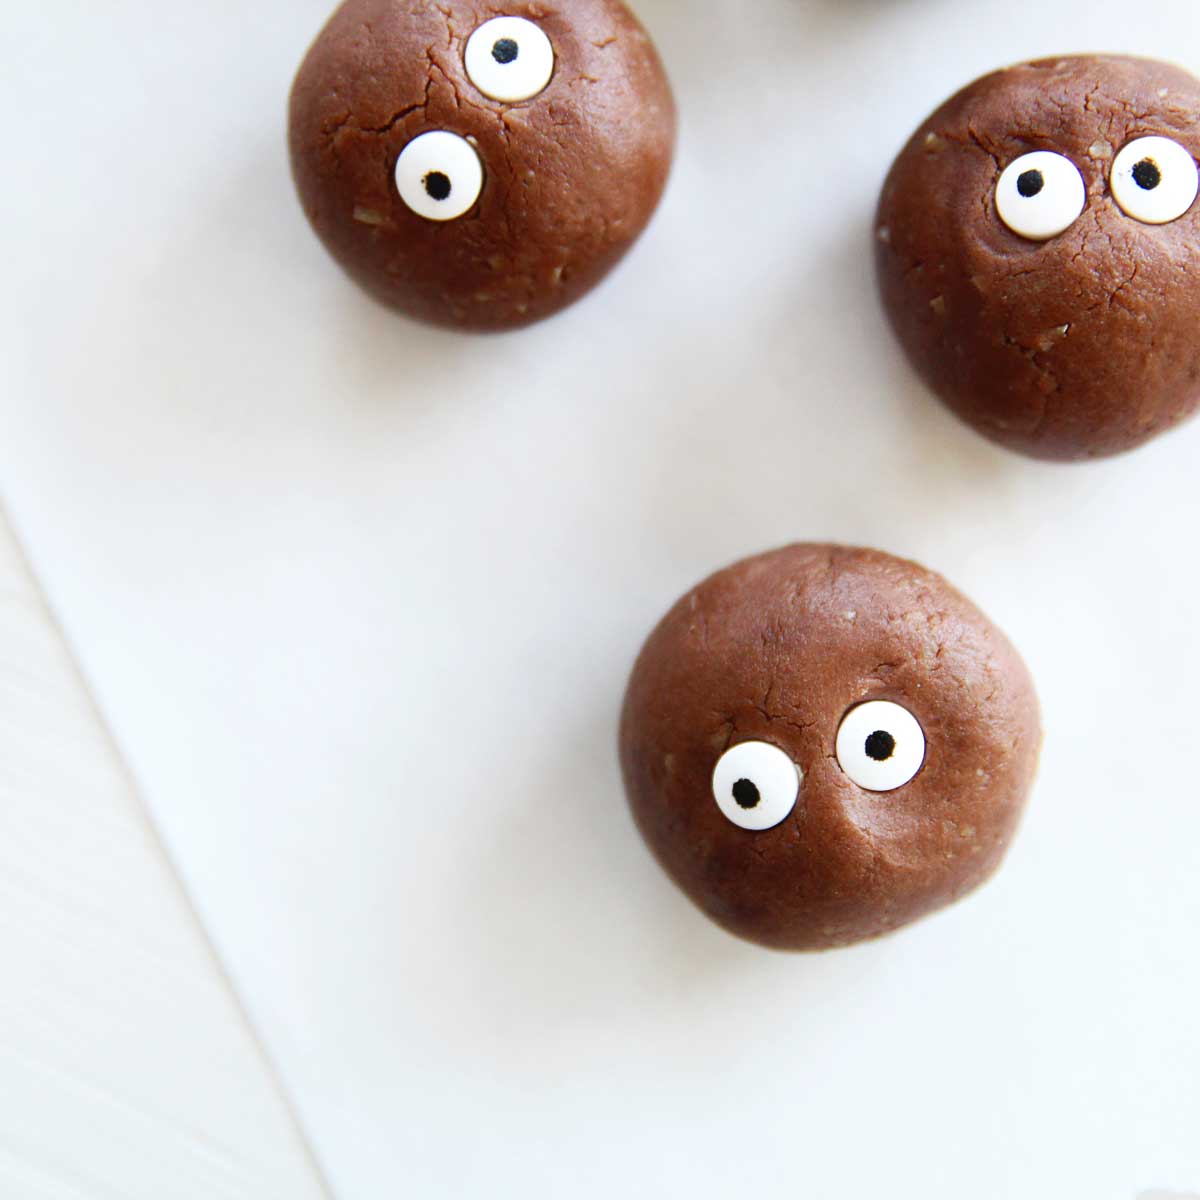 Soot Spirit Chocolate Protein Balls for Halloween (no-bake, Vegan recipe) - Canned Chickpea Yeast Bread